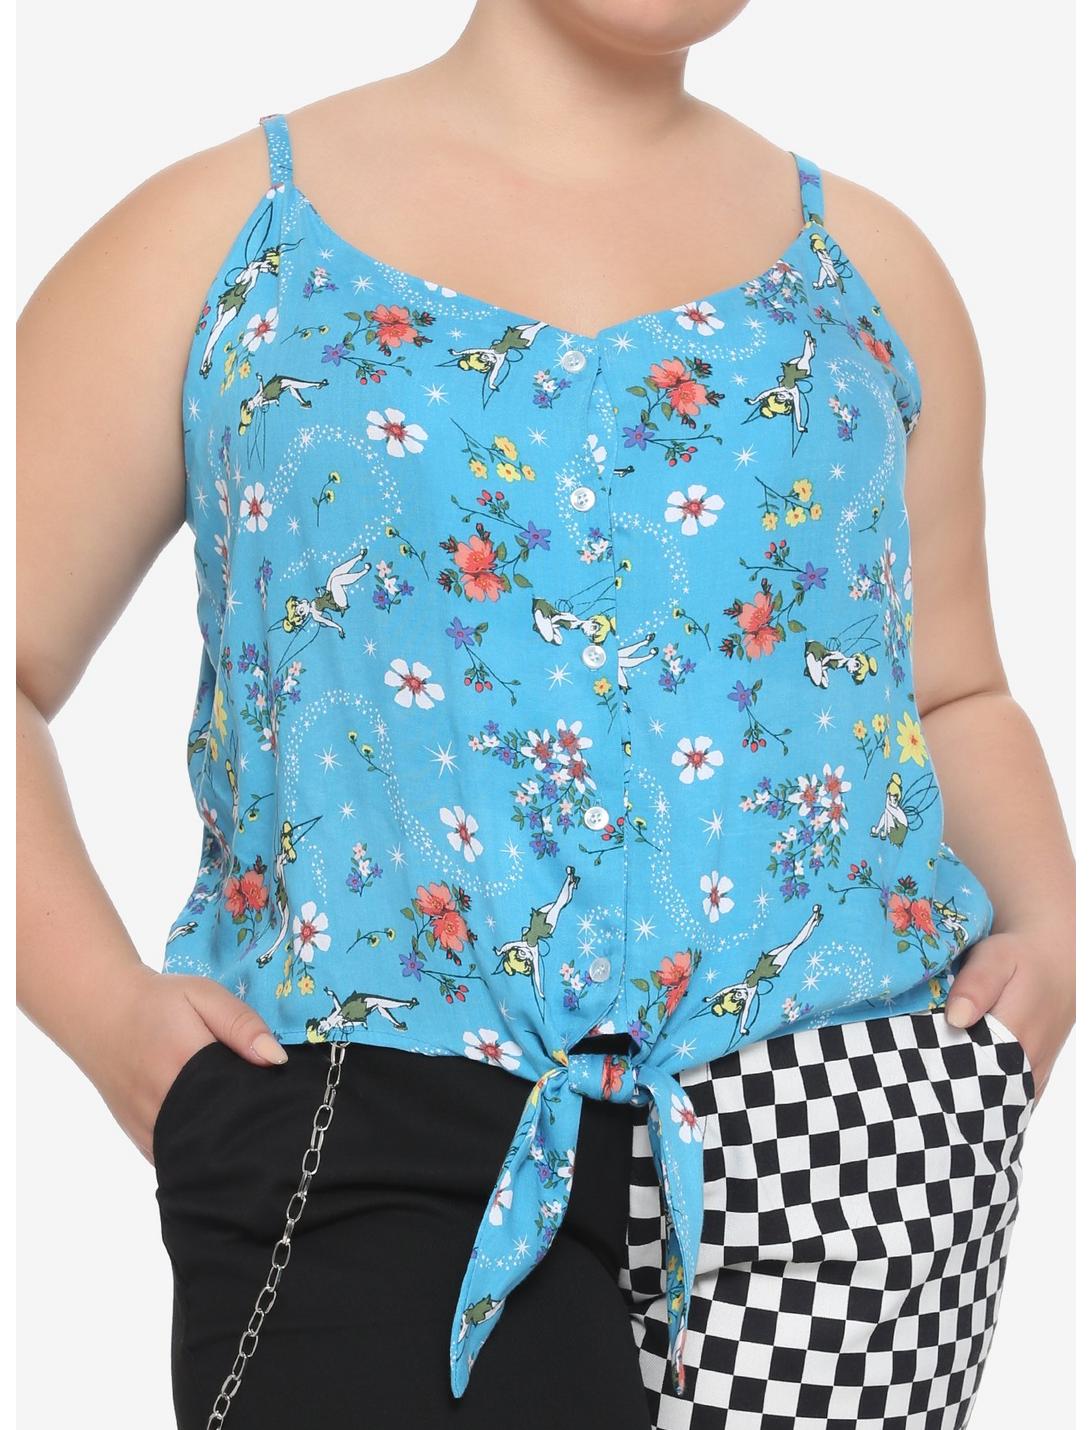 Disney Peter Pan Tinker Bell Strappy Tie-Front Girls Woven Button-Up Tank Top Plus Size, MULTI, hi-res